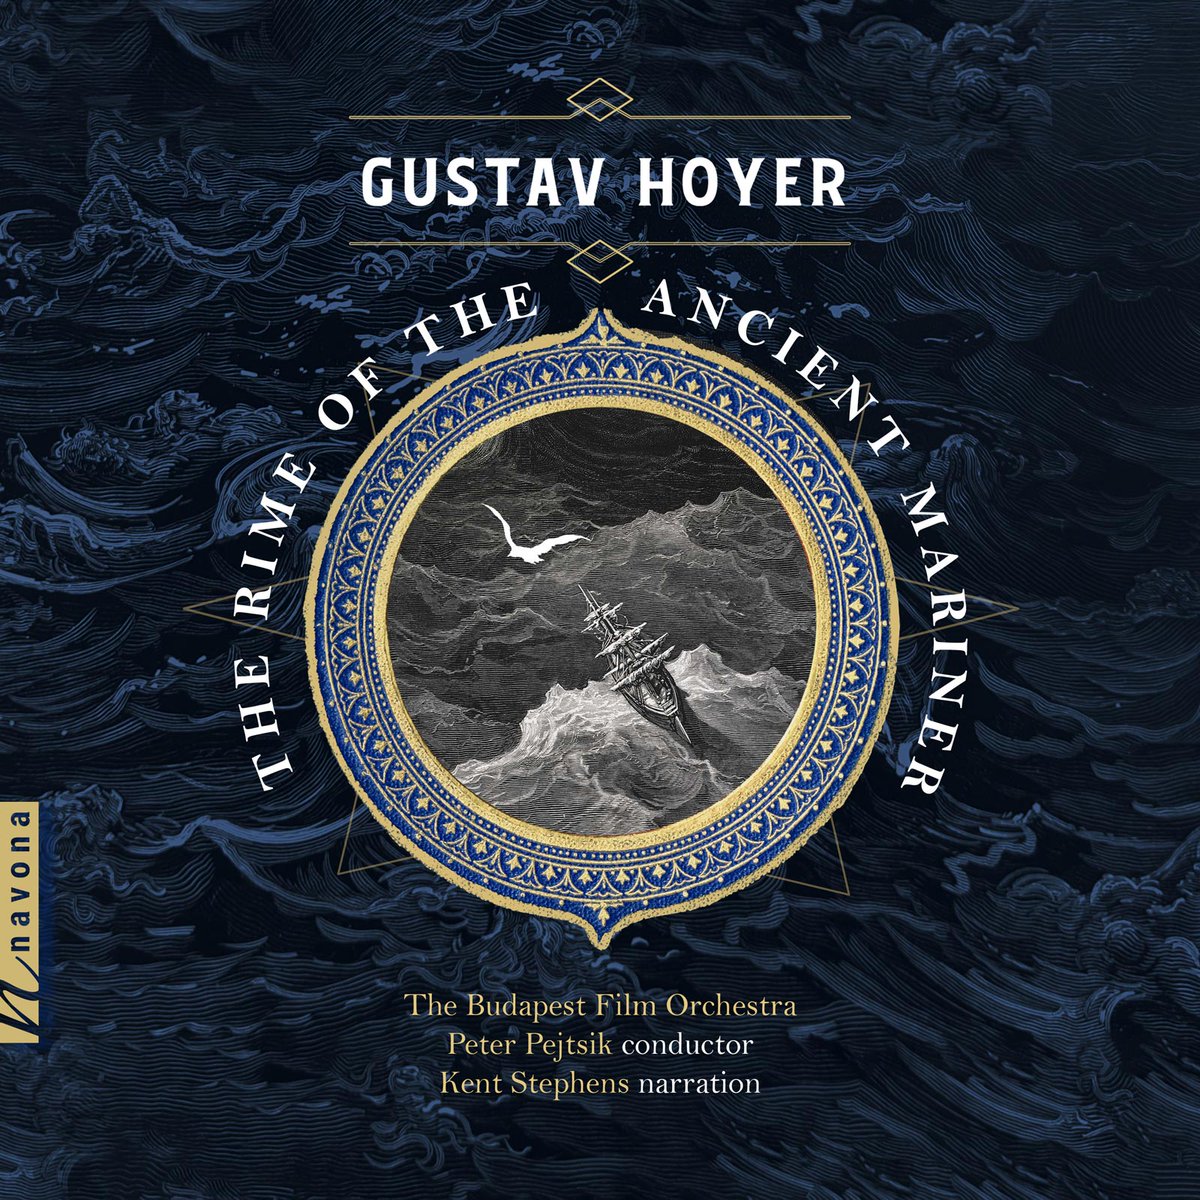 John Dante Prevedini from @mvdaily finds 'lightness and playfulness' among the 'many layers of emotional and atmospheric depth' in composer @GustavHoyer's #NavonaRecords release, THE RIME OF THE ANCIENT MARINER. Read their full review here. classicalmusicdaily.com/2024/05/hoyer.…